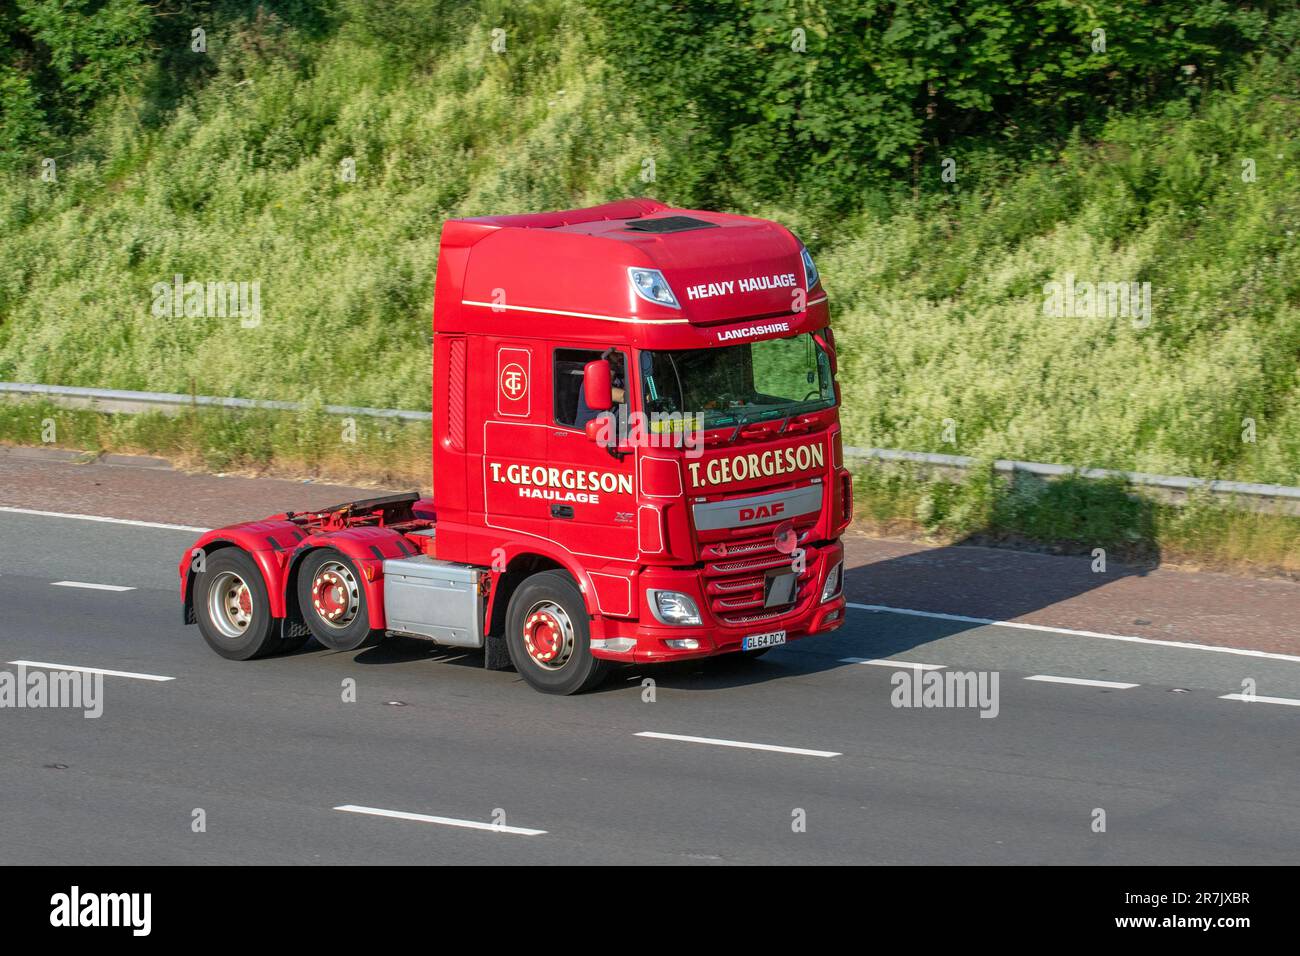 T.GEORGESON Heavy Haulage DAF tractor Unit cab; travelling on the M6 motorway, UK Stock Photo